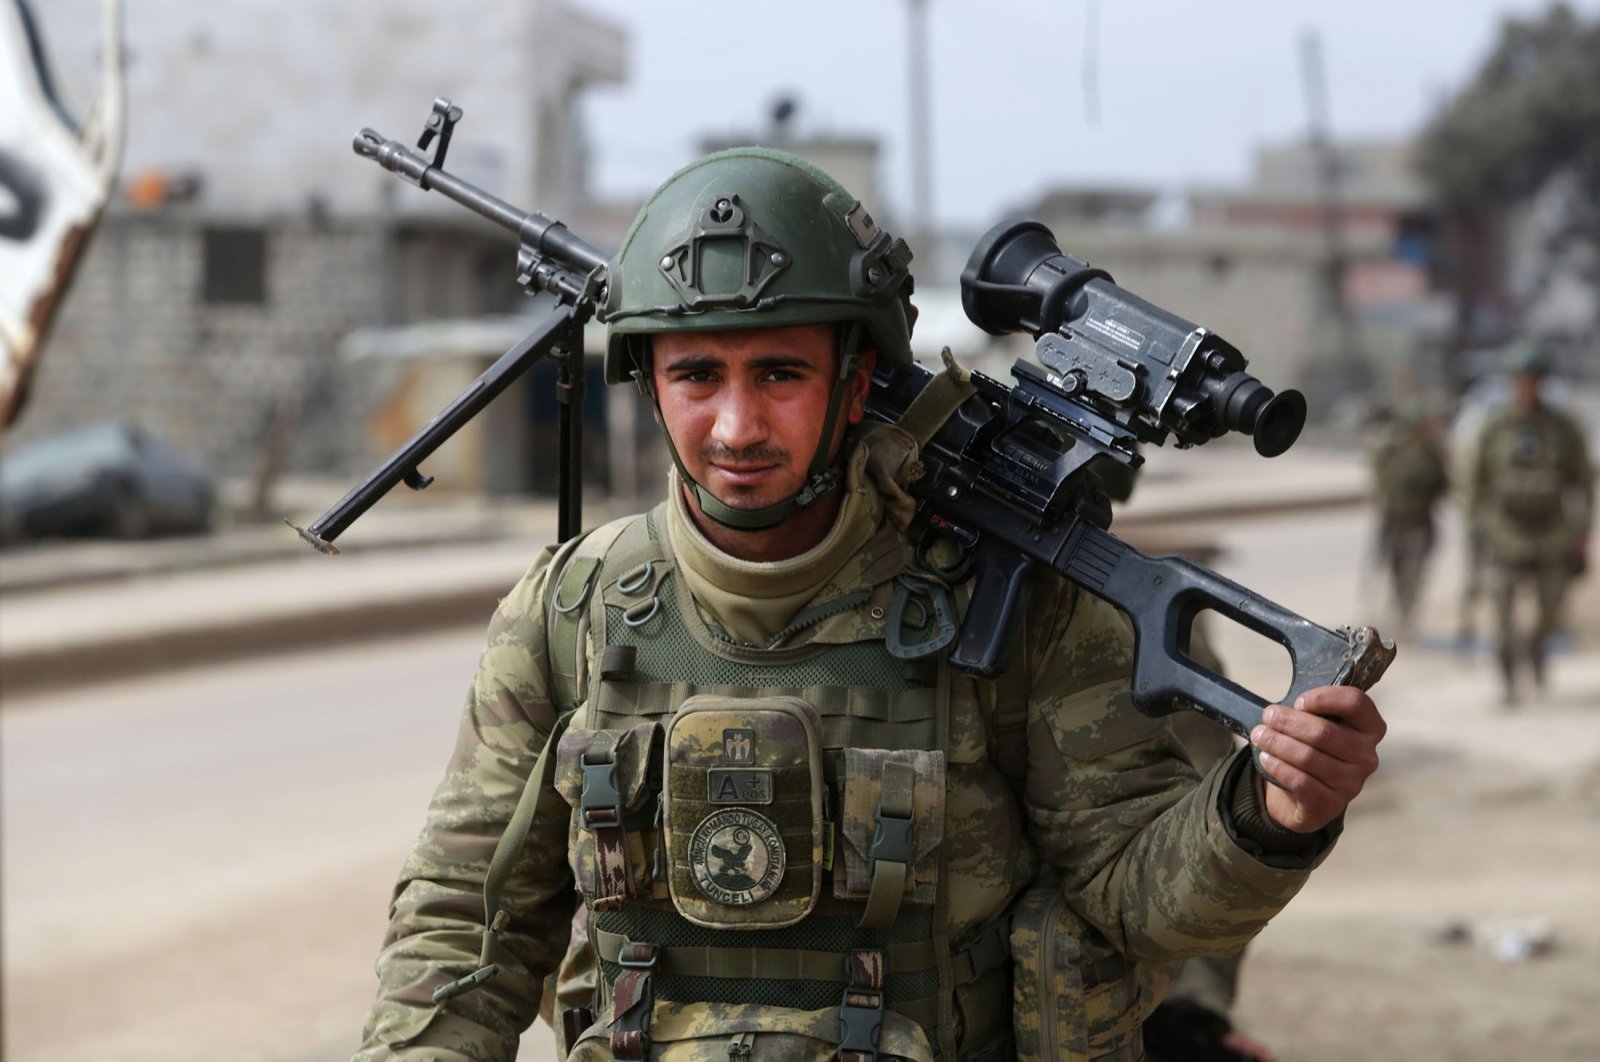 A Turkish soldier patrols with troops in the town of Atareb, western countryside of Aleppo province, Syria, Feb. 19, 2020. (AFP Photo)